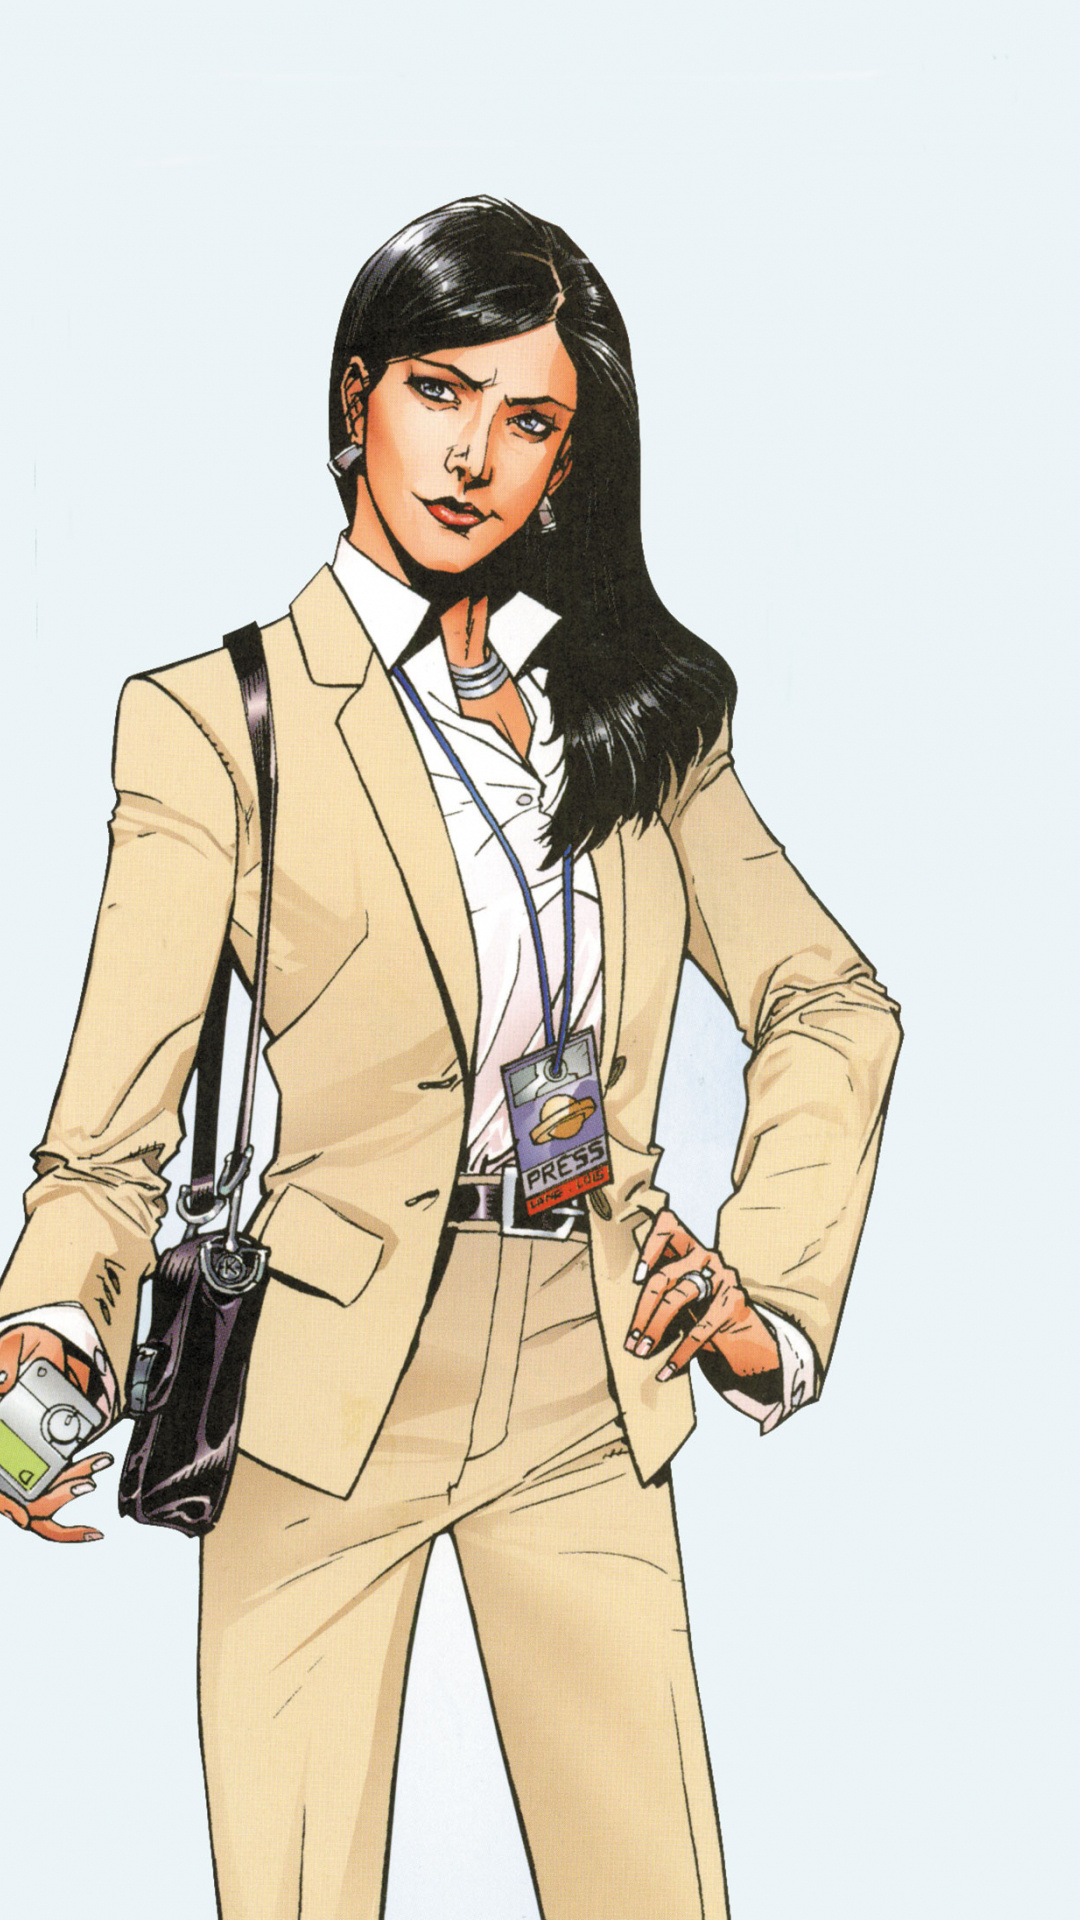 Lois Lane Wallpapers, Comics, HQ, Pictures, 1080x1920 Full HD Phone